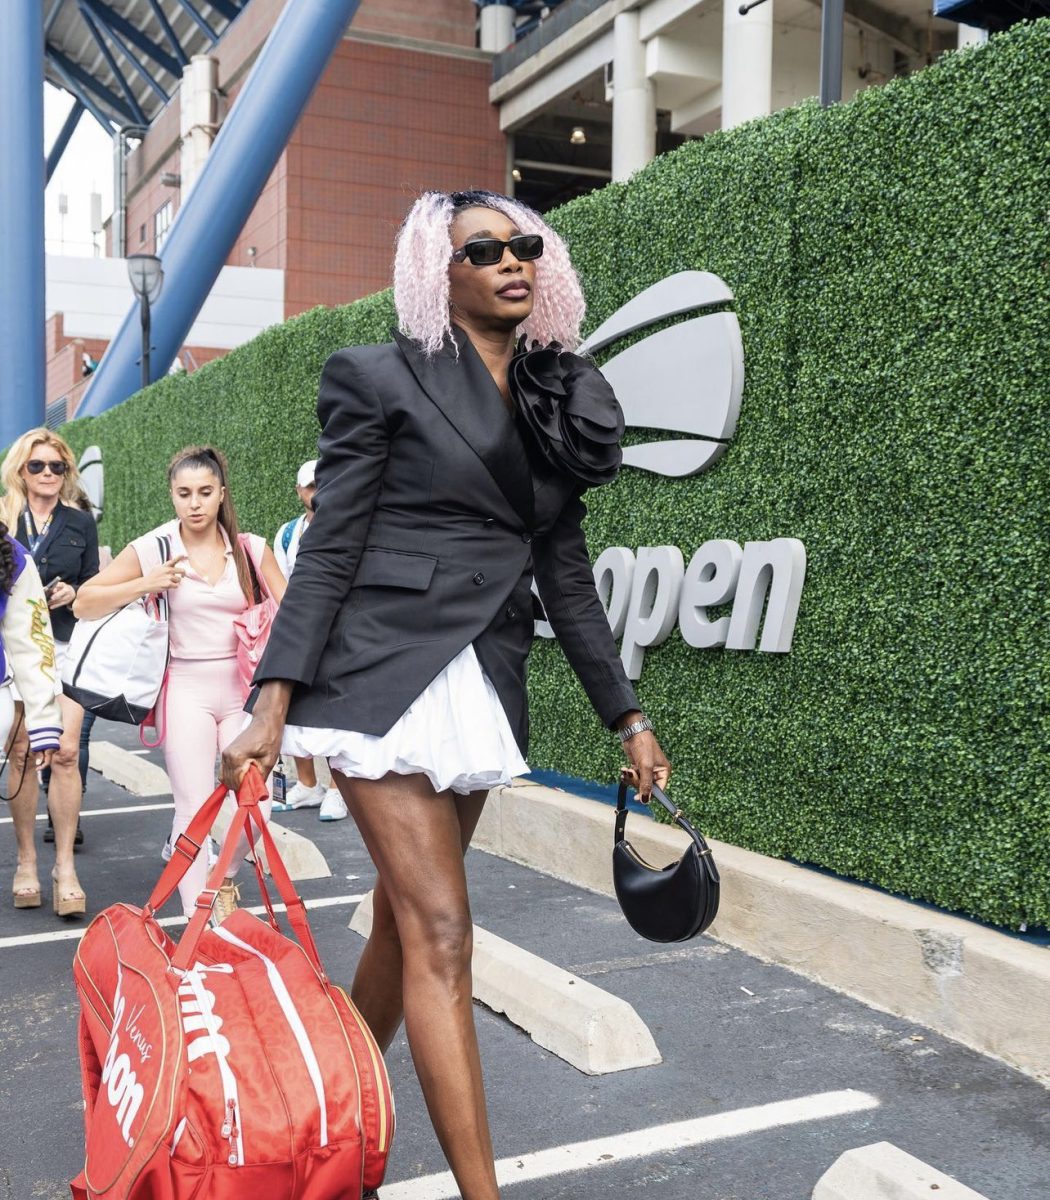 U.S. Open players express their voice through bold fashion choices. (Courtesy of Instagram)